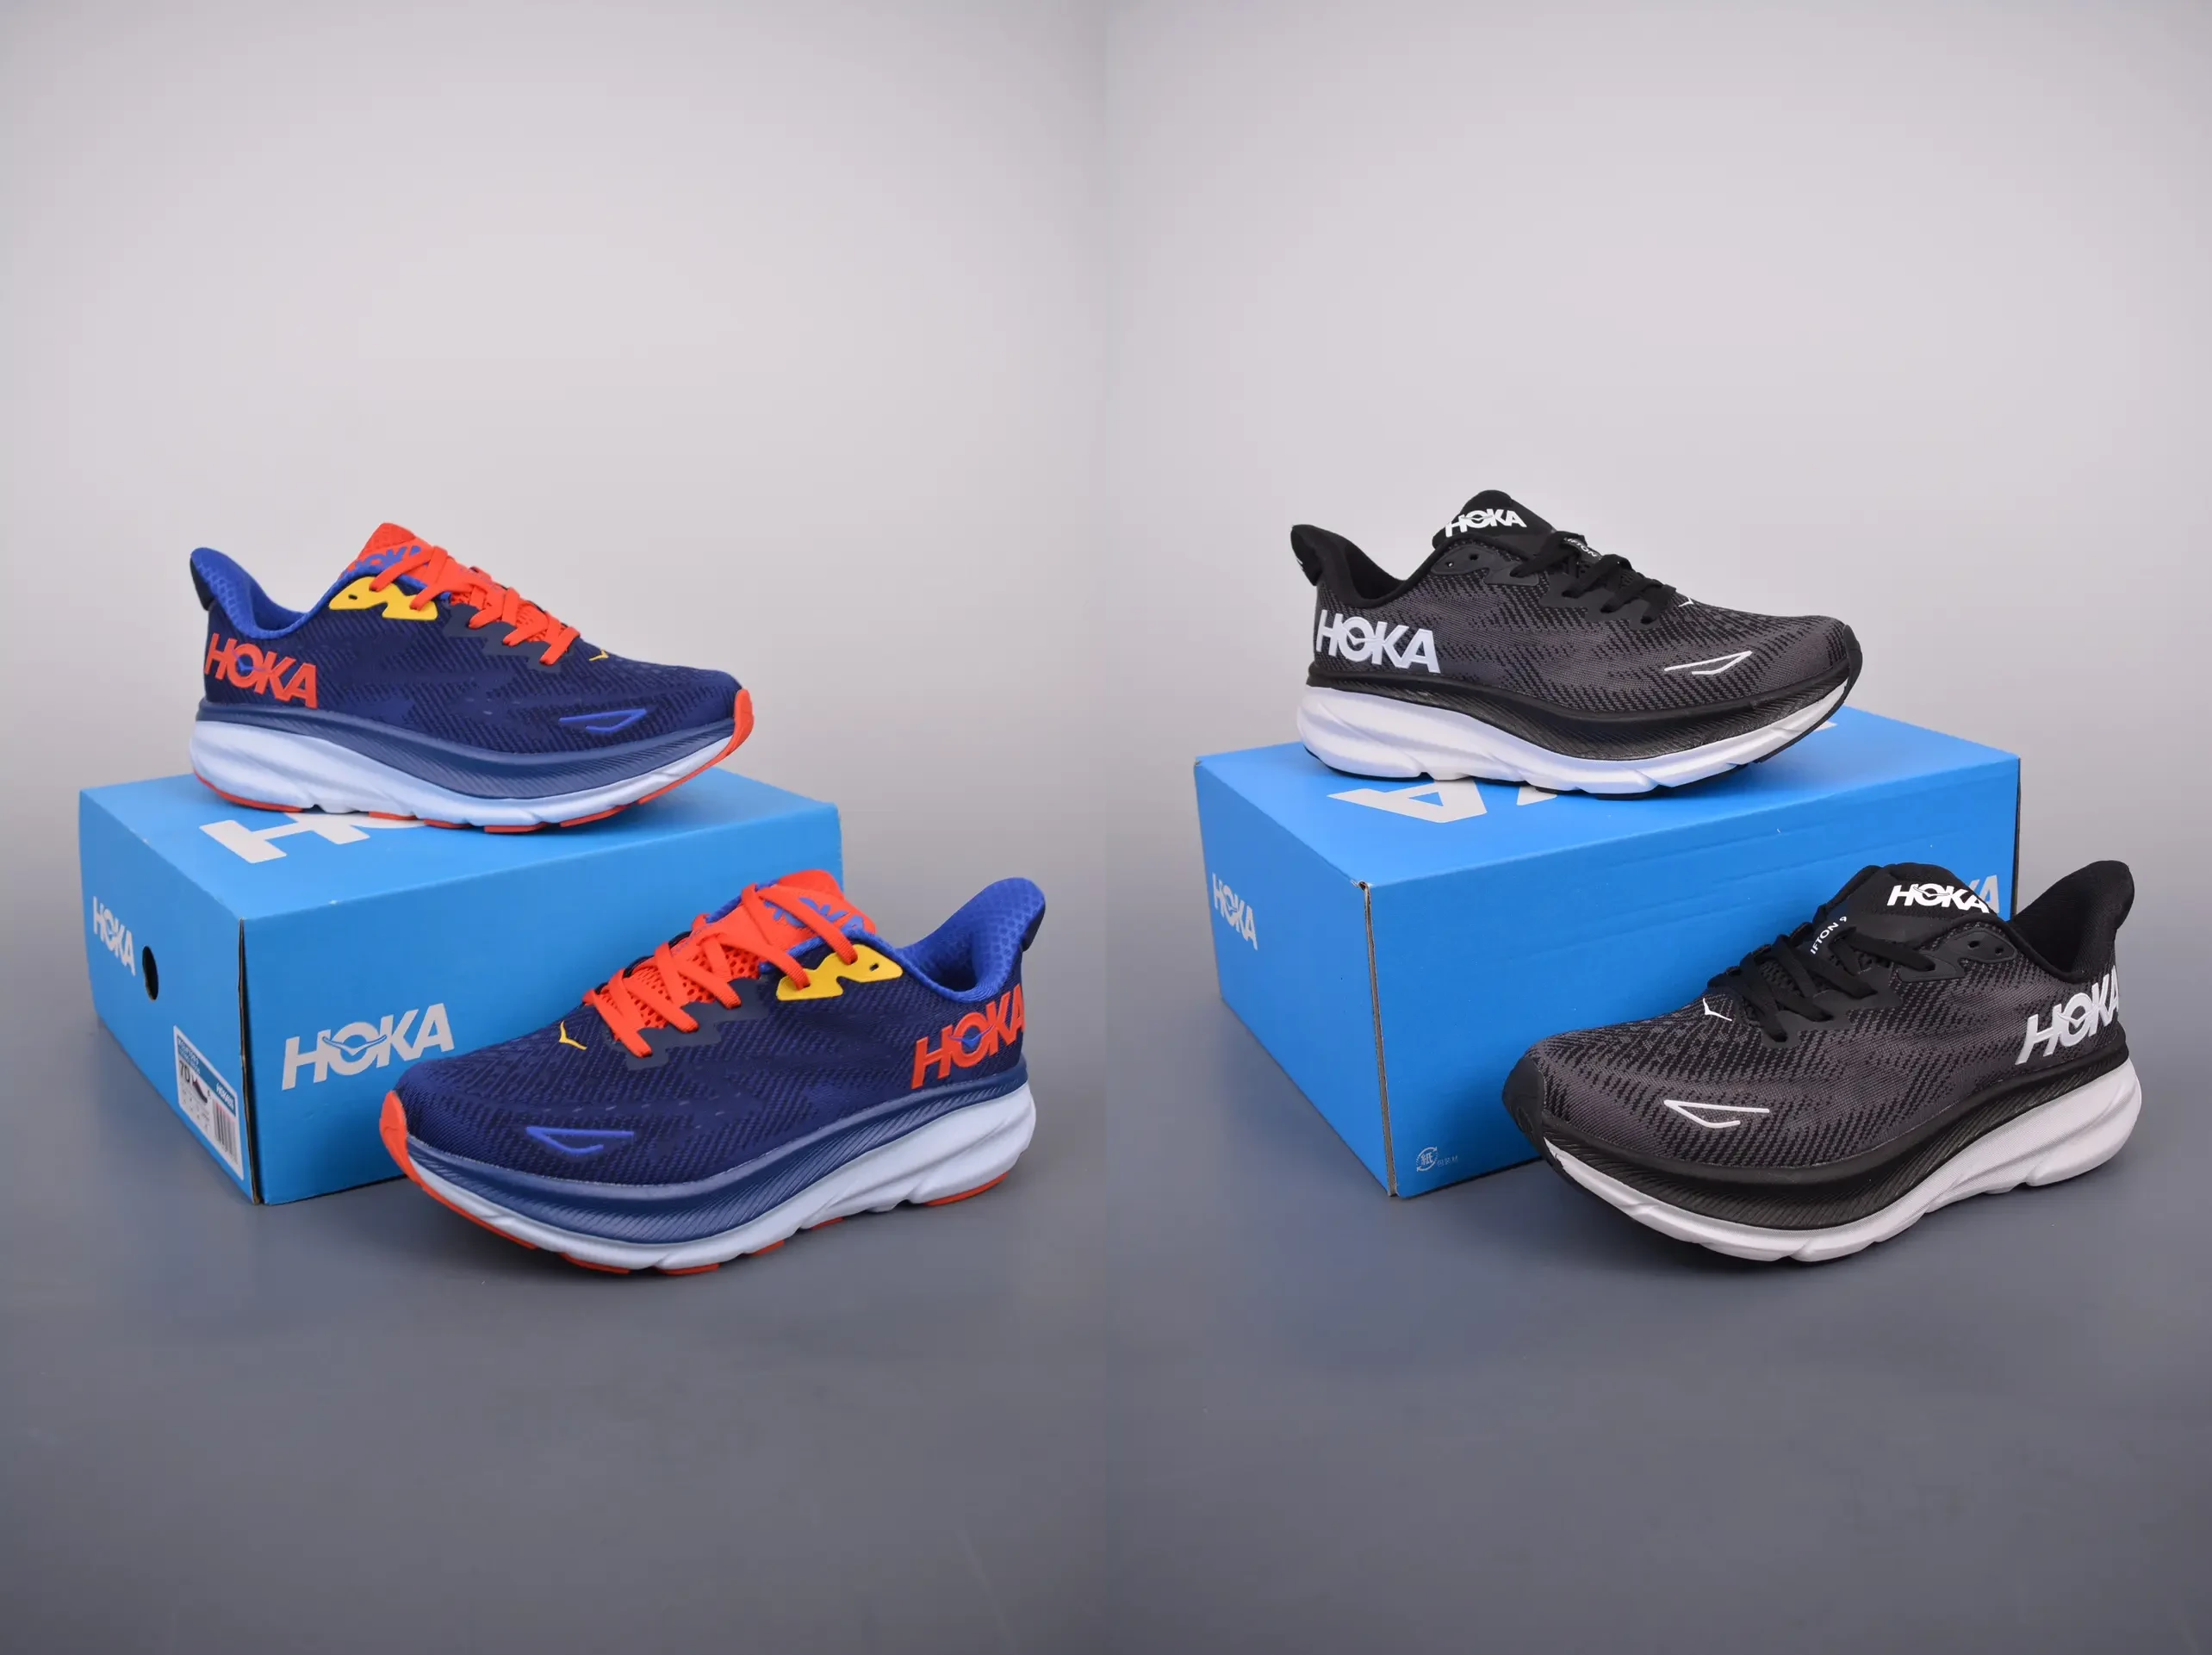 YASSW | Comparing Clifton and Bondi Running Shoes: A Comprehensive Analysis of Design, Performance